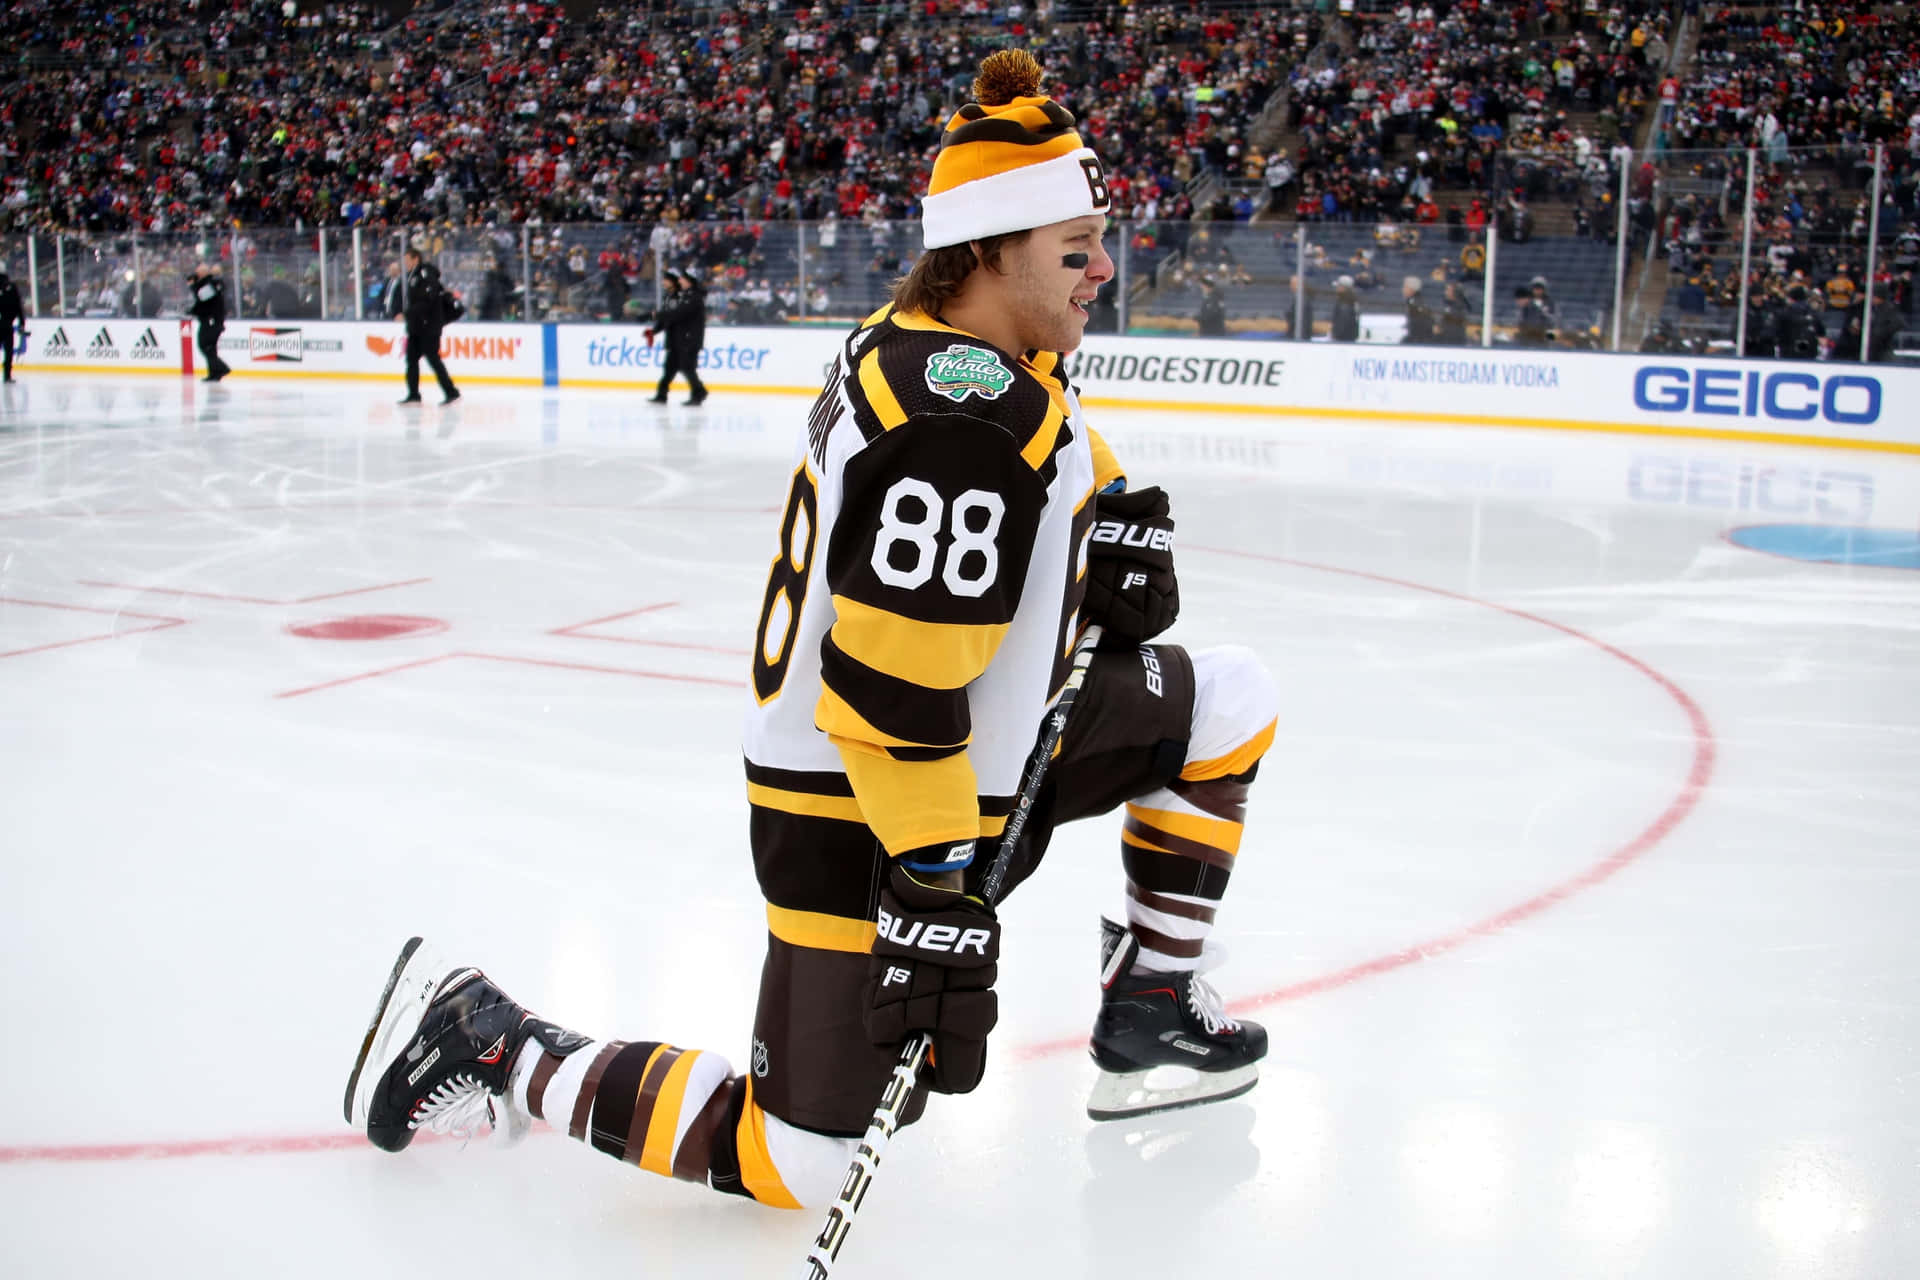 Unite the Pack and Go For Gold with the Boston Bruins